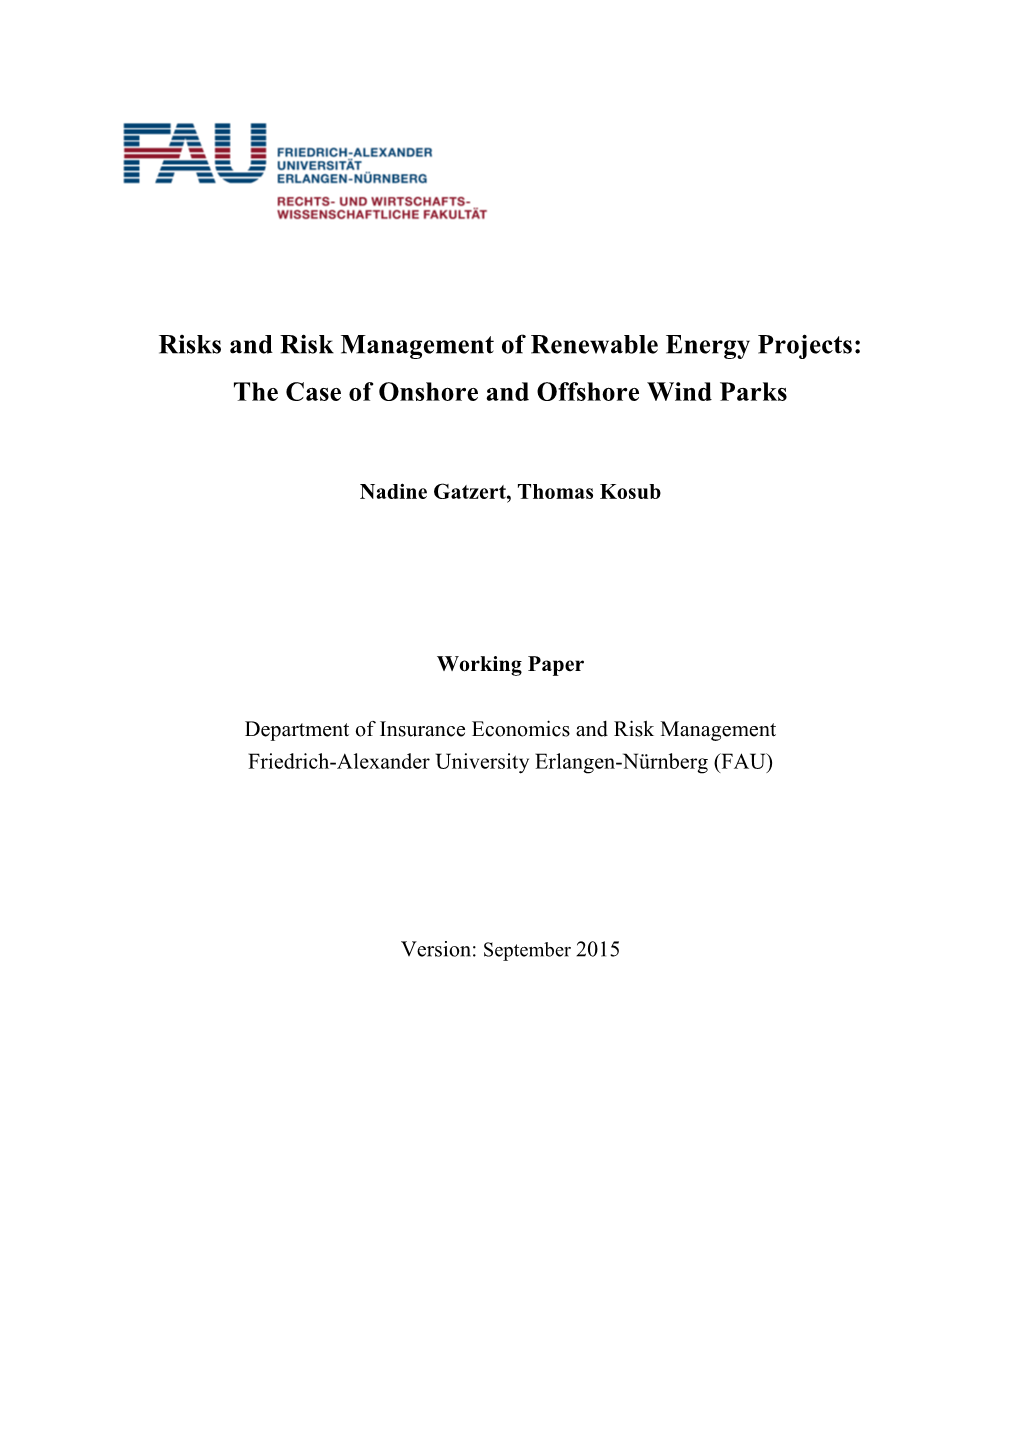 Risks and Risk Management of Renewable Energy Projects: the Case of Onshore a Nd Offshore Wind Parks